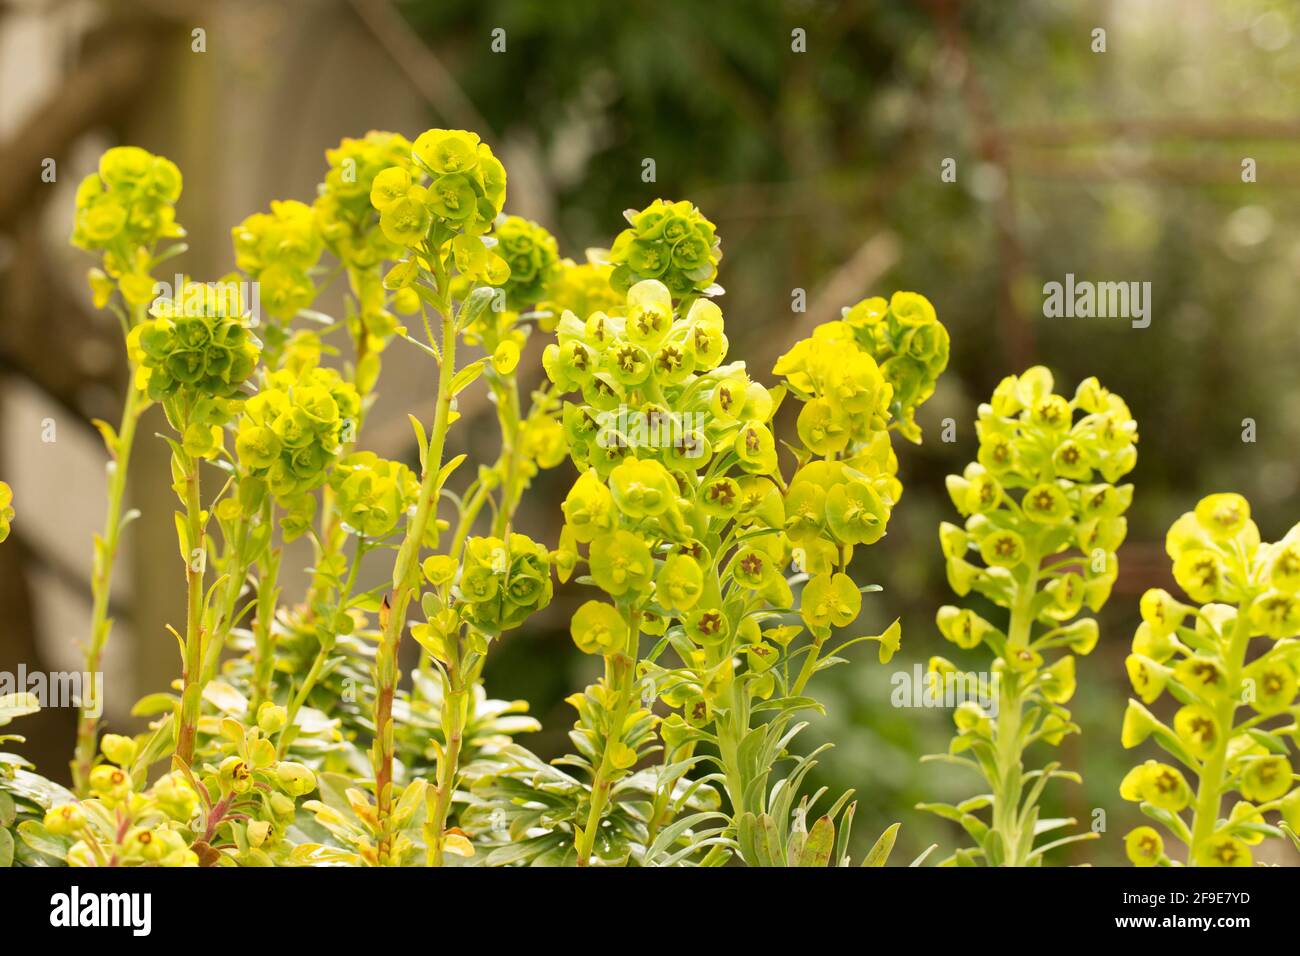 A flowering example of Euphorbia Humpty Dumpty on display at a garden centre in early April. England UK GB Stock Photo